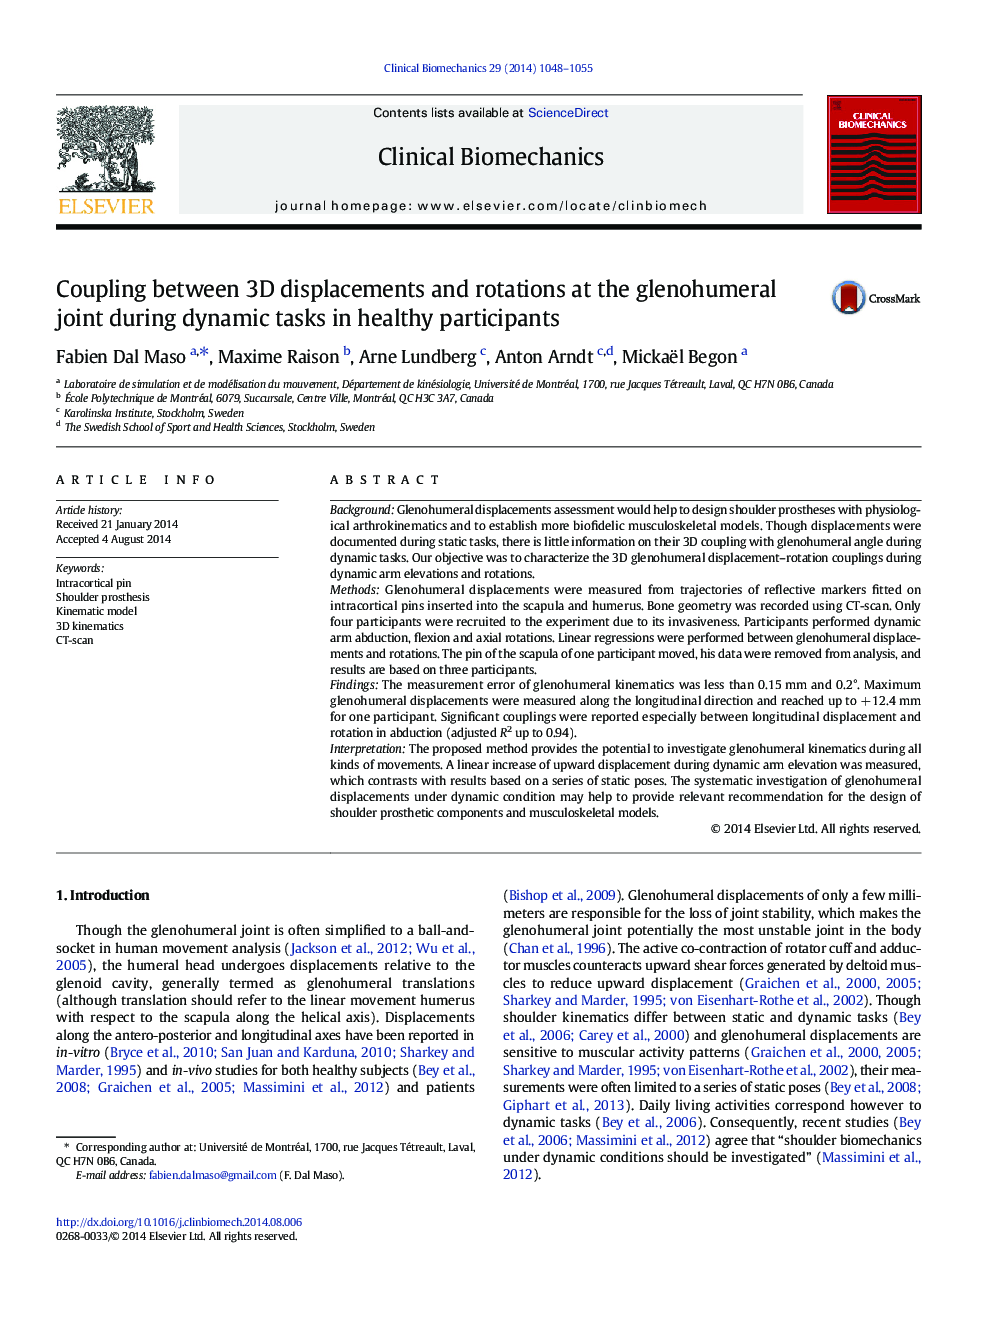 Coupling between 3D displacements and rotations at the glenohumeral joint during dynamic tasks in healthy participants